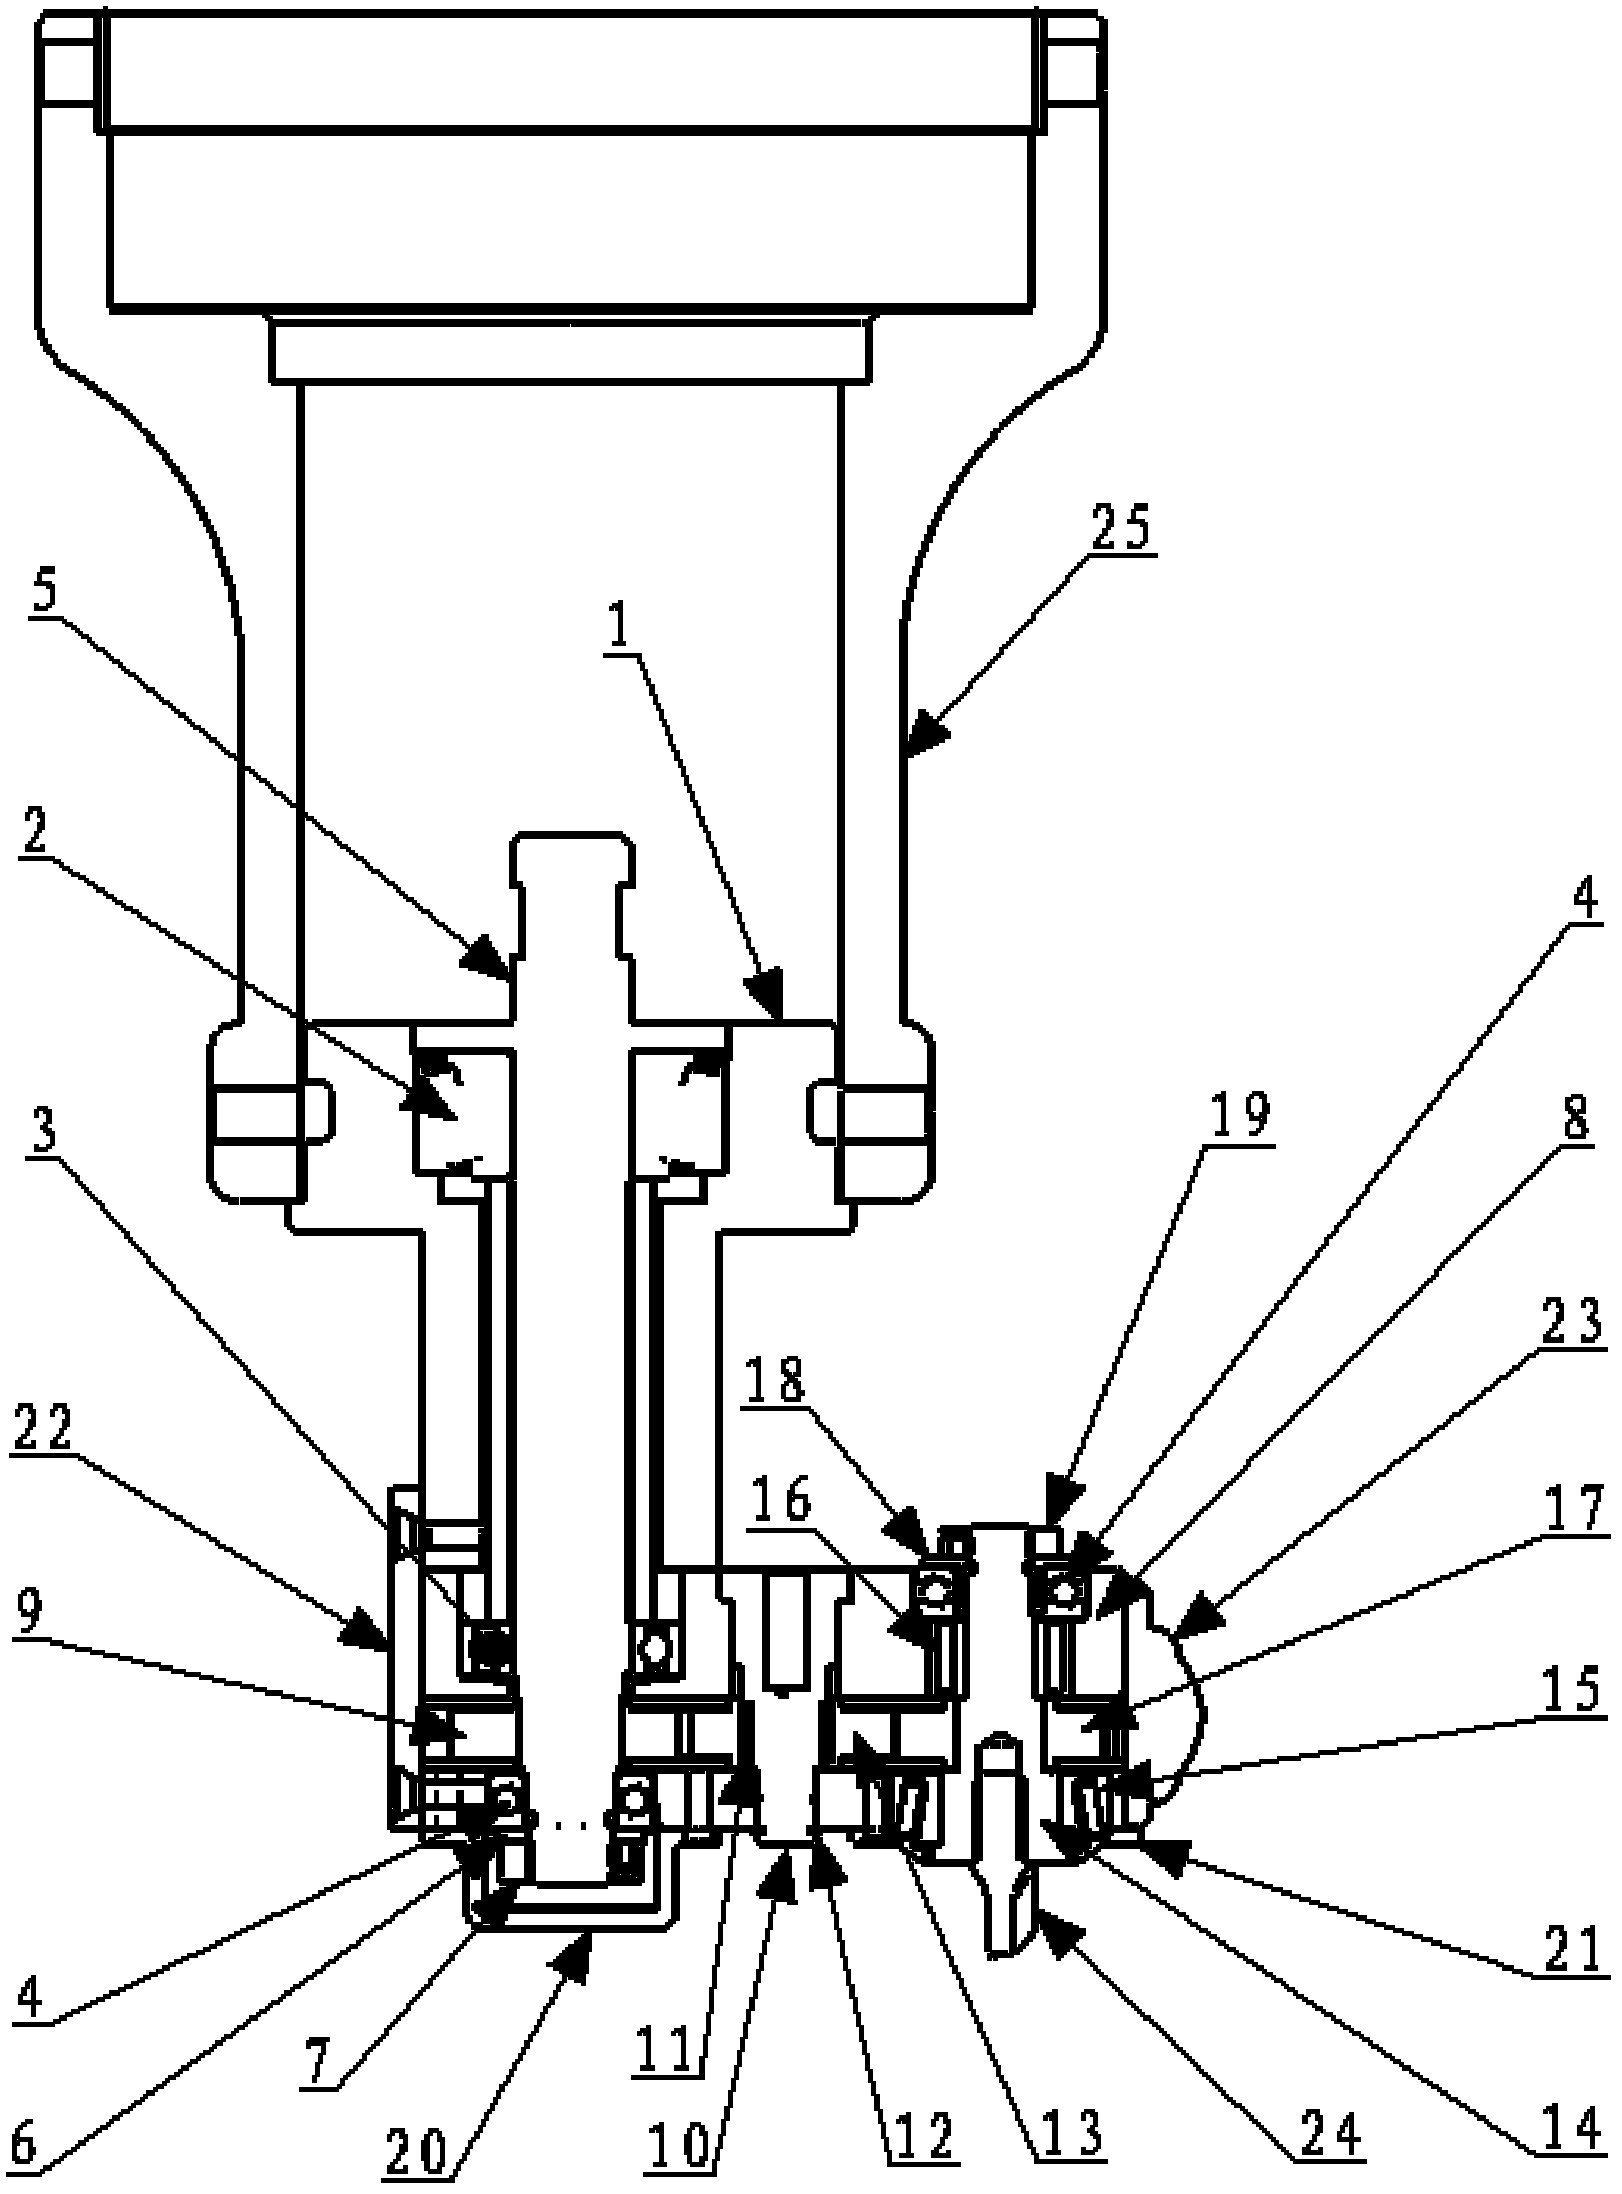 Direction-variable cutting tool